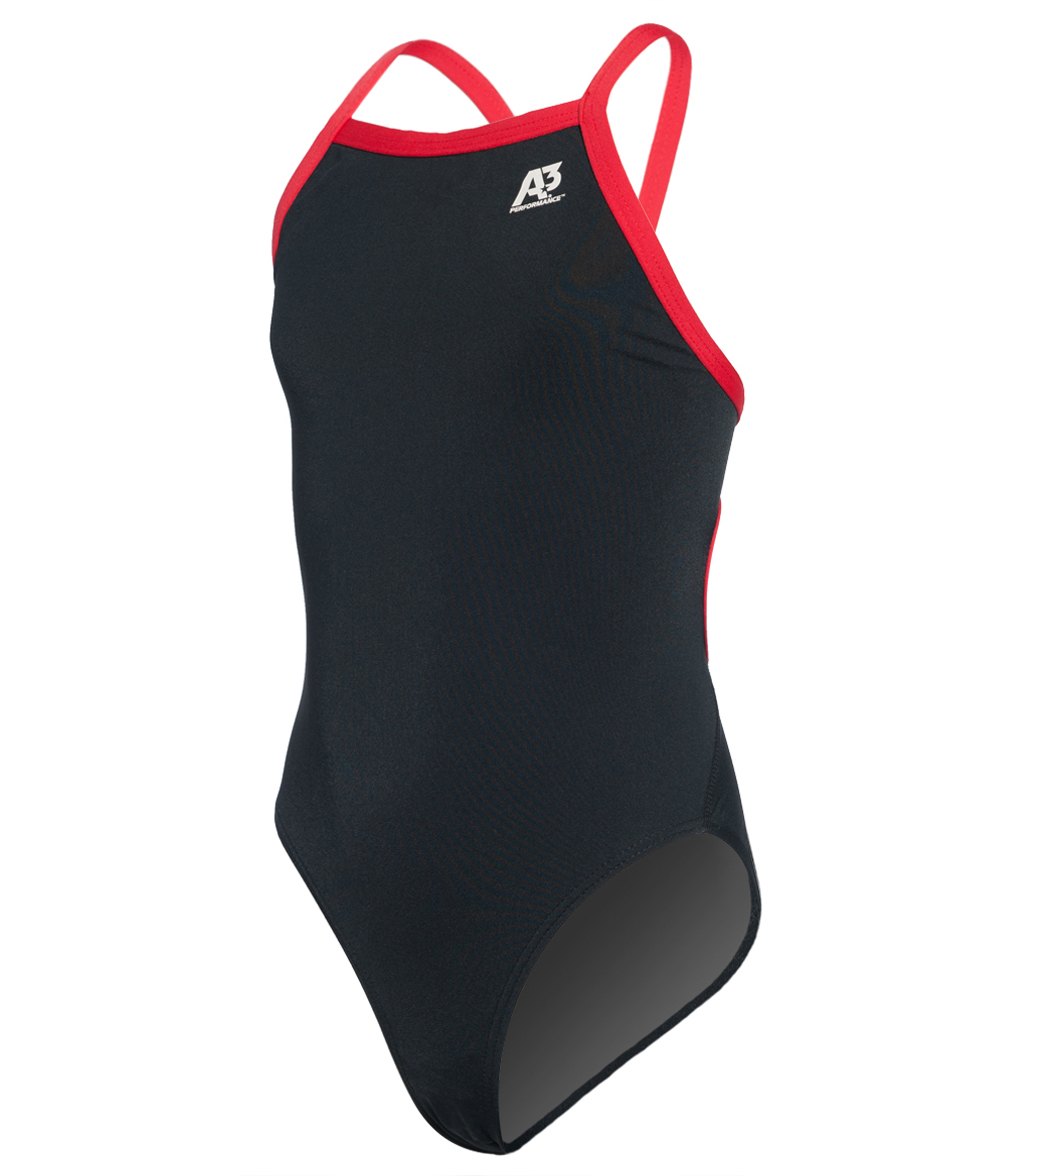 A3 Performance Female Youth X-Back Poly Swimsuit W/ Contrast Trim - Black/Red 22 Polyester/Pbt - Swimoutlet.com